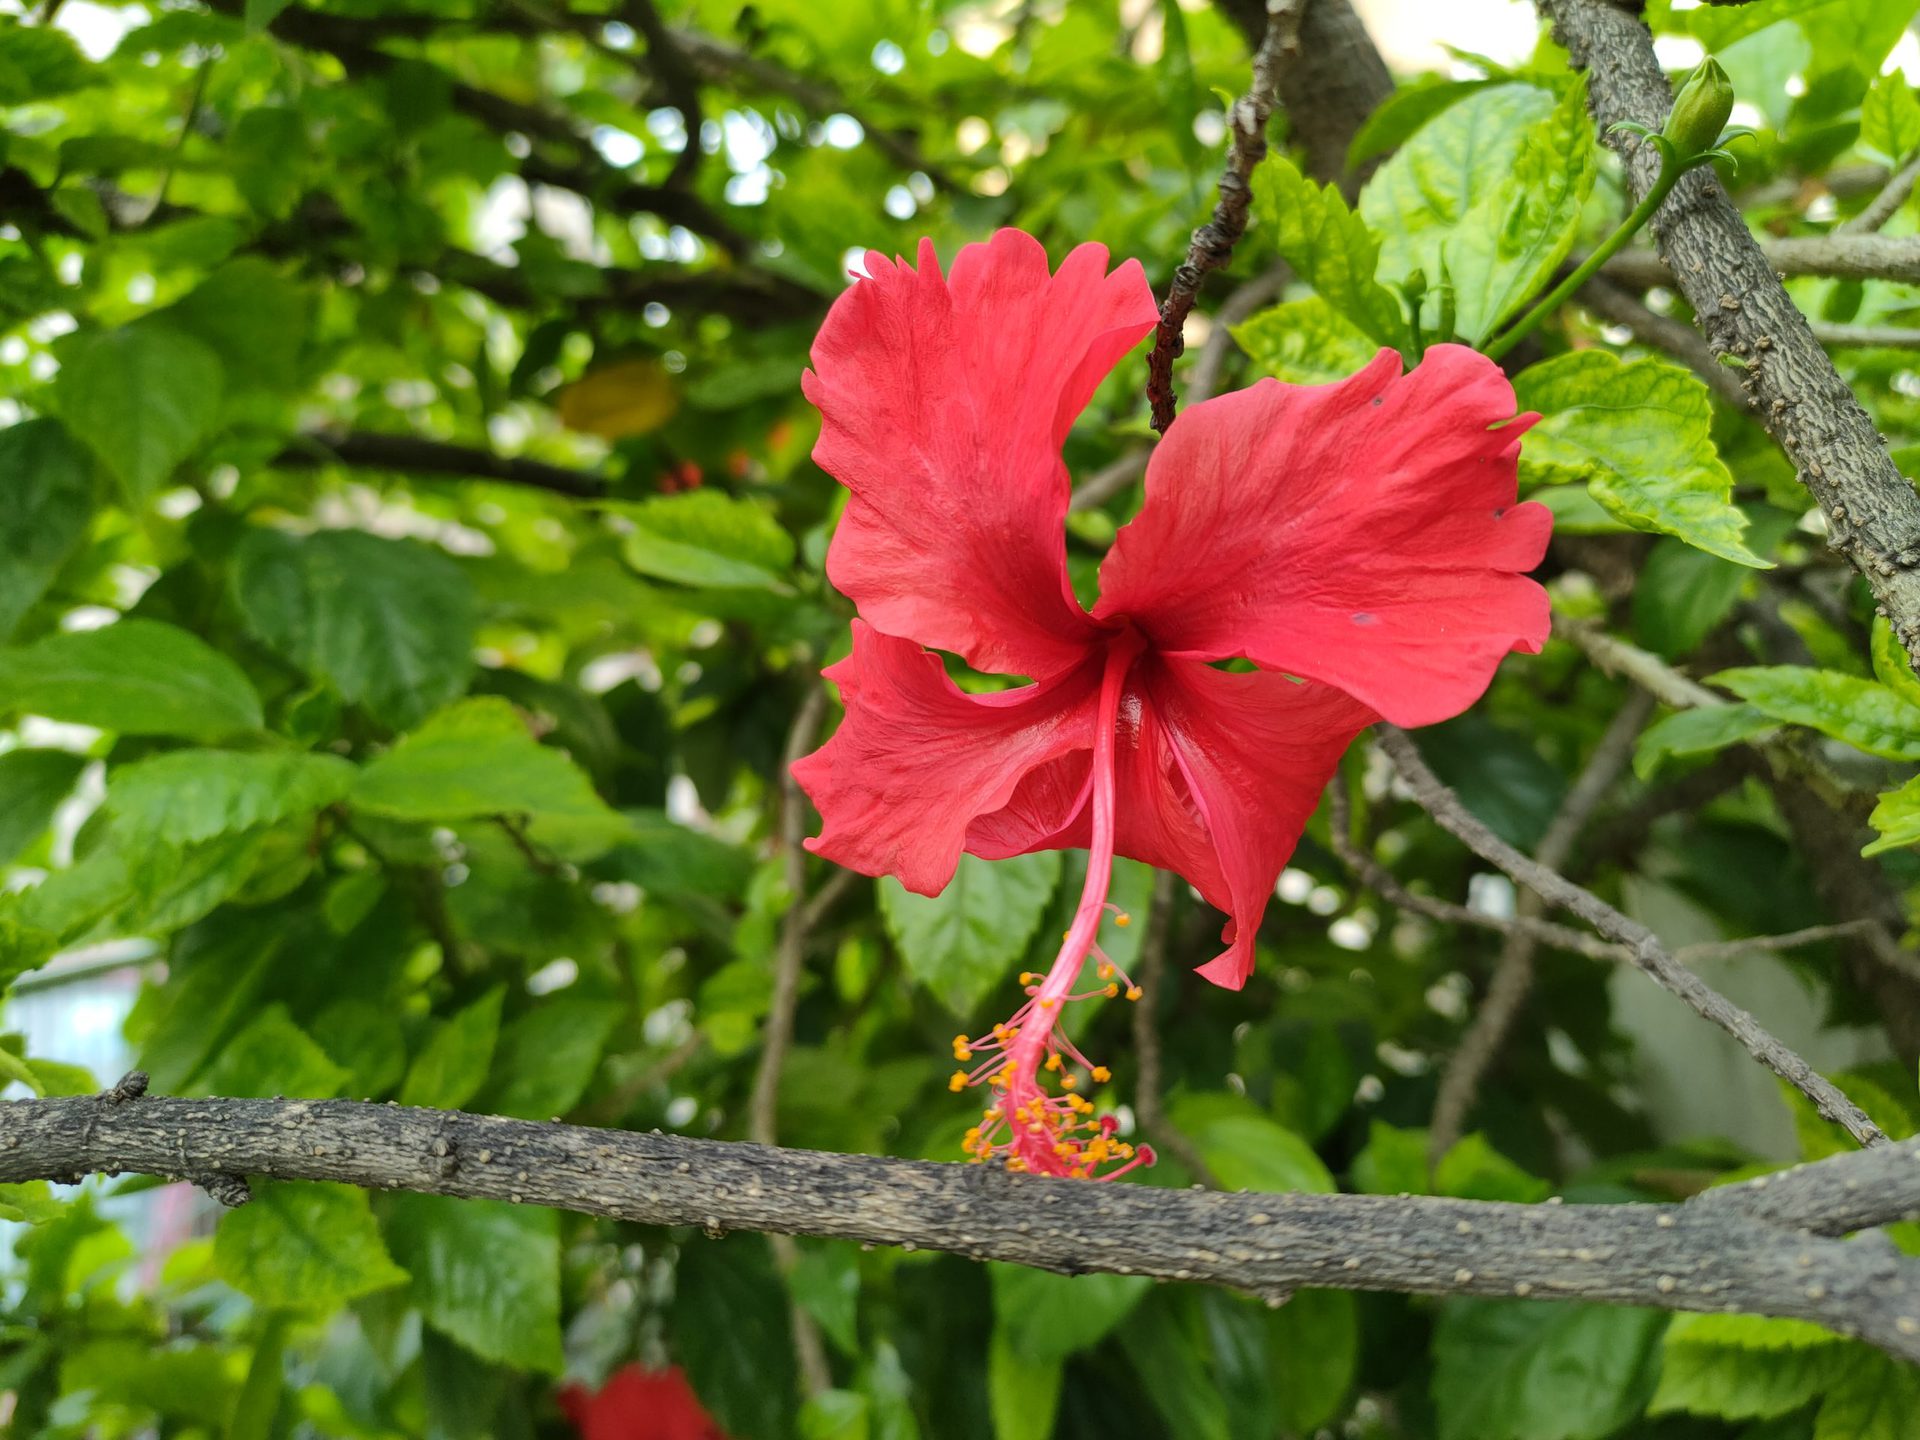 realme GT wide angle camera photo of a red flower